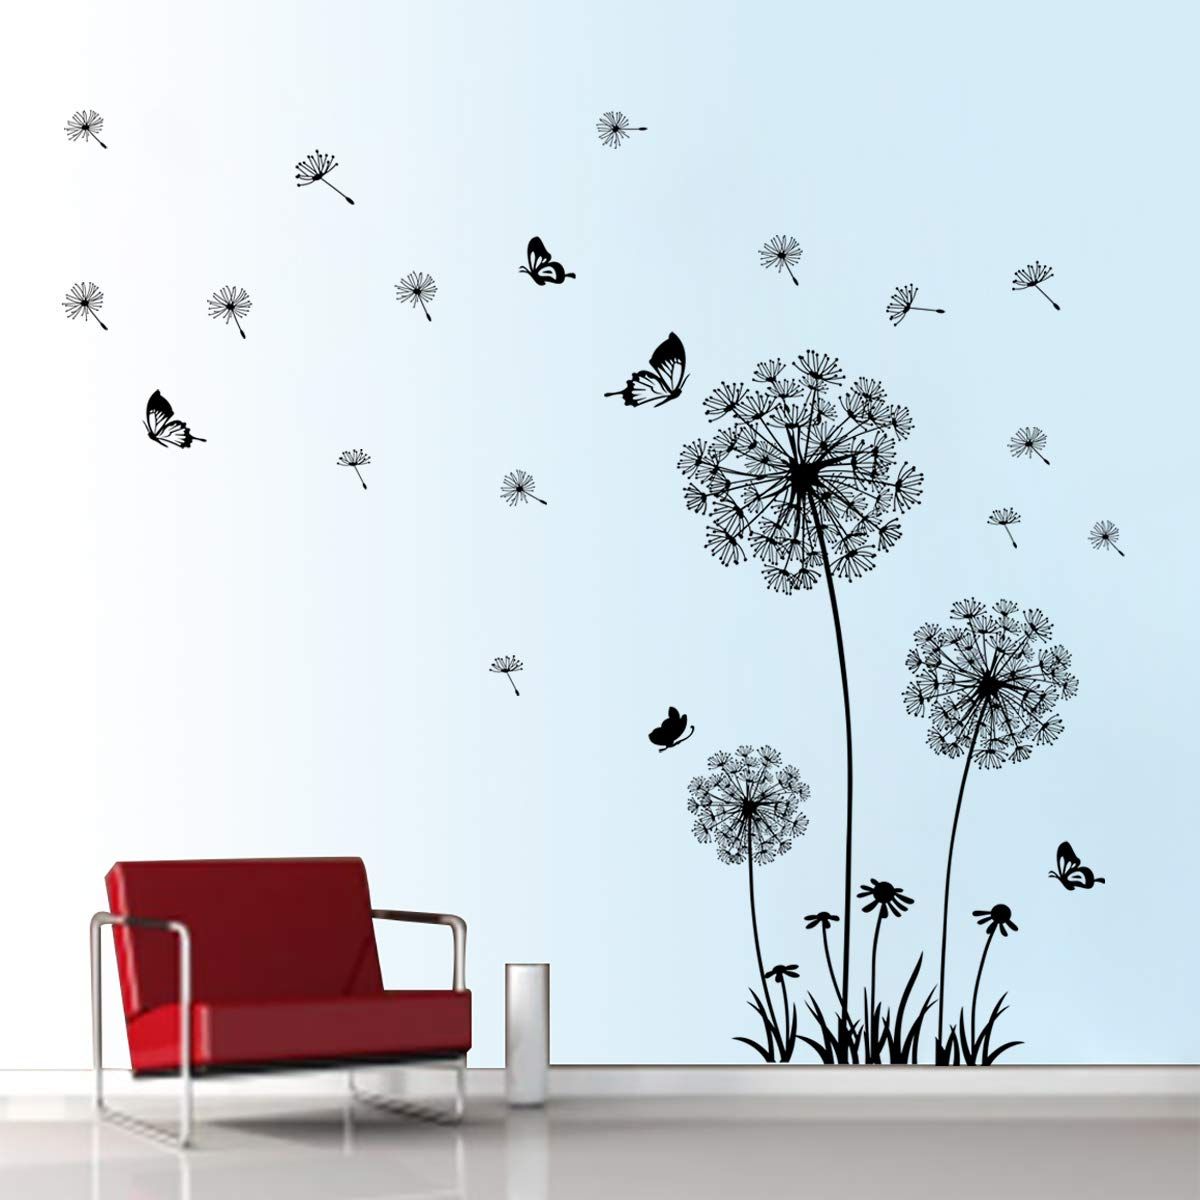 Trendy Flying Dandelion Wall Art Throughout Amazon: Decalmile Dandelion Wall Decals Flying Flowers Butterflies Wall  Stickers Dandelion Wall Art Living Room Bedroom Decor (black) : Tools &  Home Improvement (View 1 of 15)